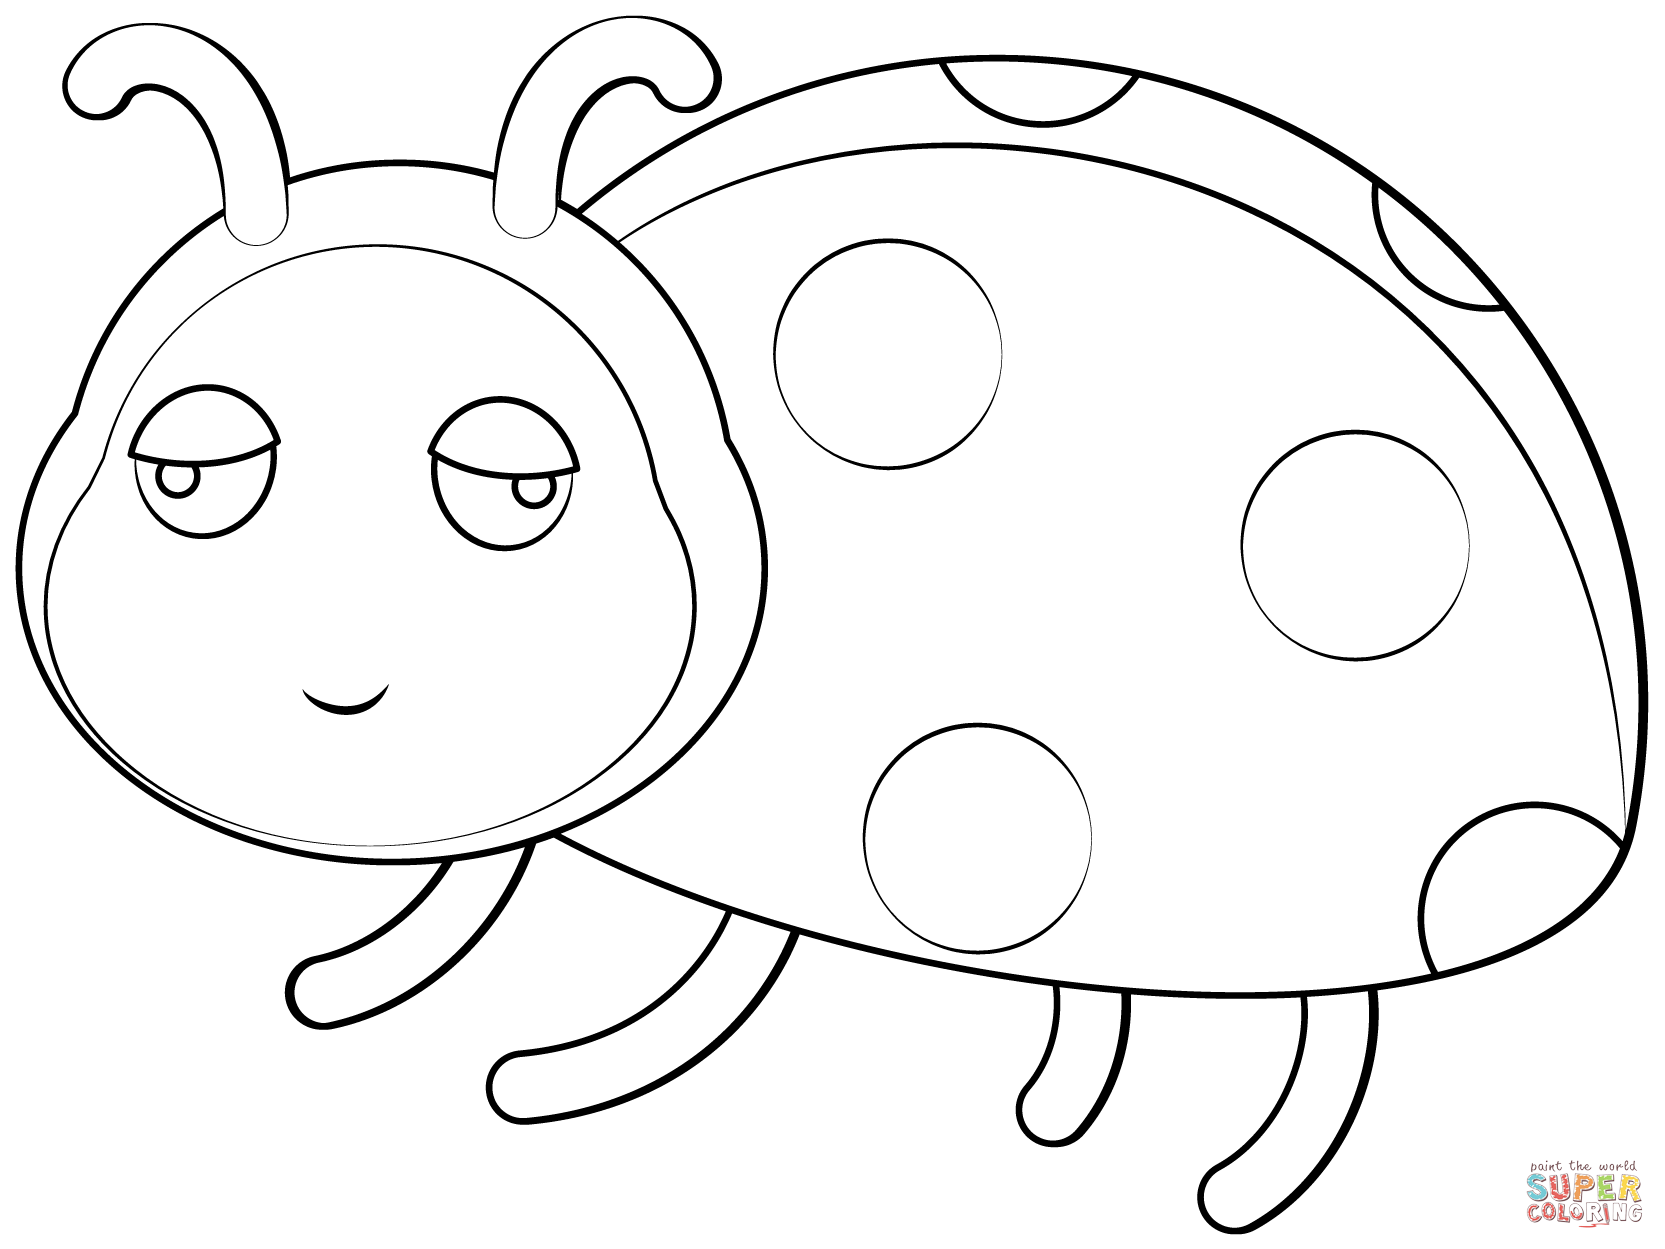 Ladybug coloring page free printable coloring pages